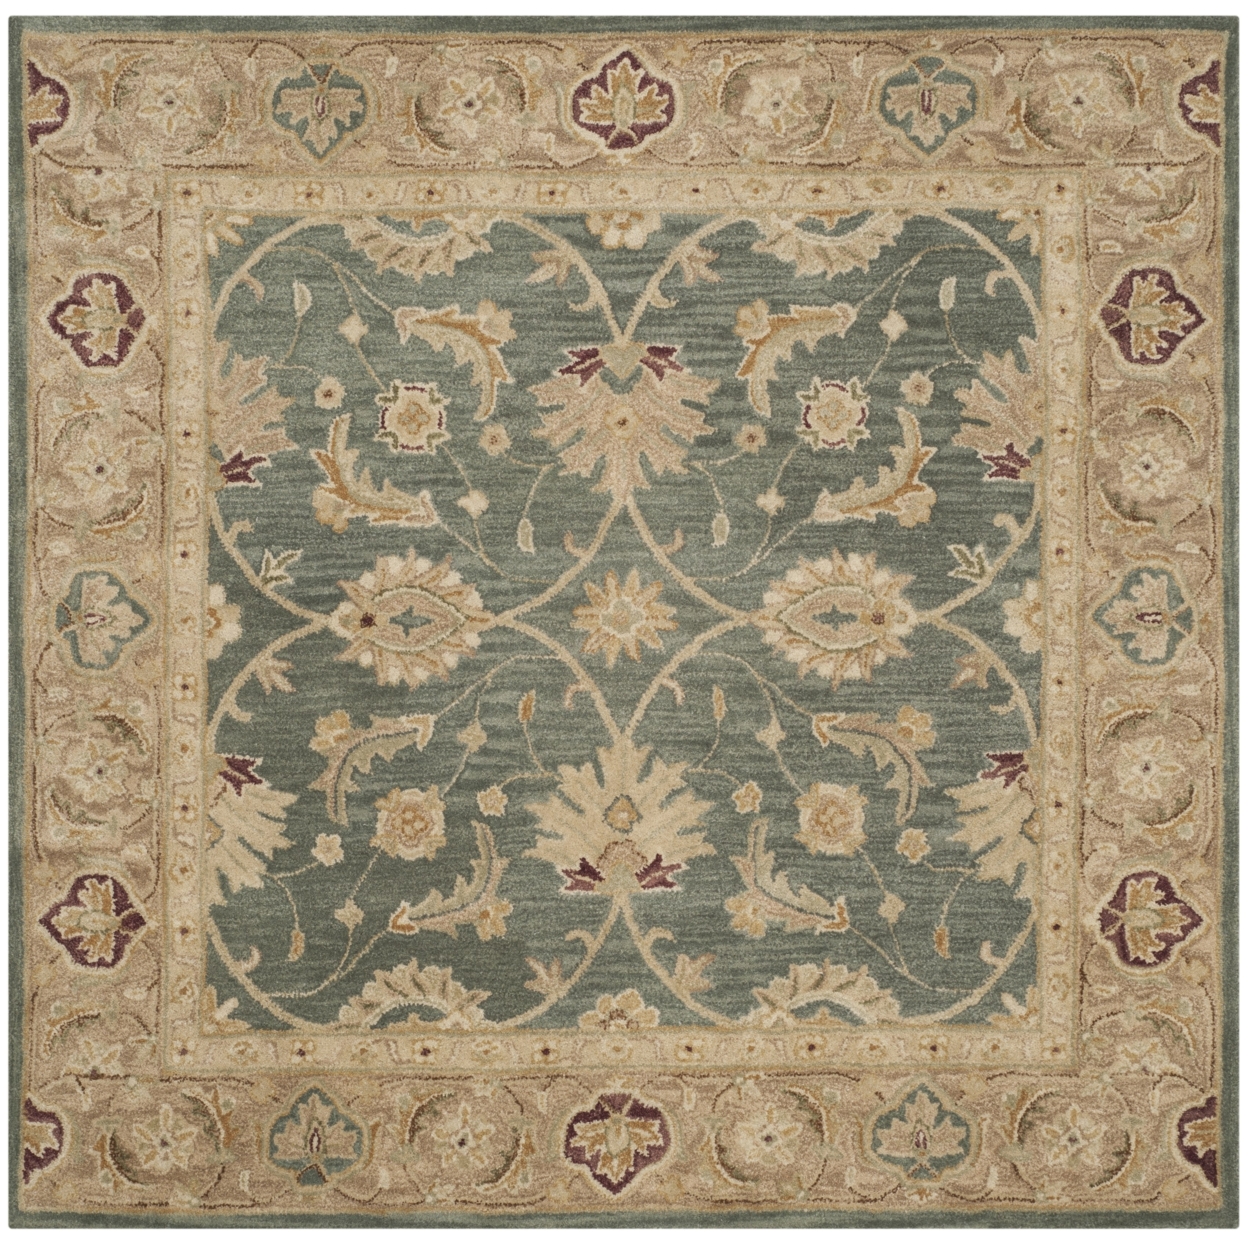 SAFAVIEH Antiquity AT849B Handmade Teal Blue / Taupe Rug - 6' Square